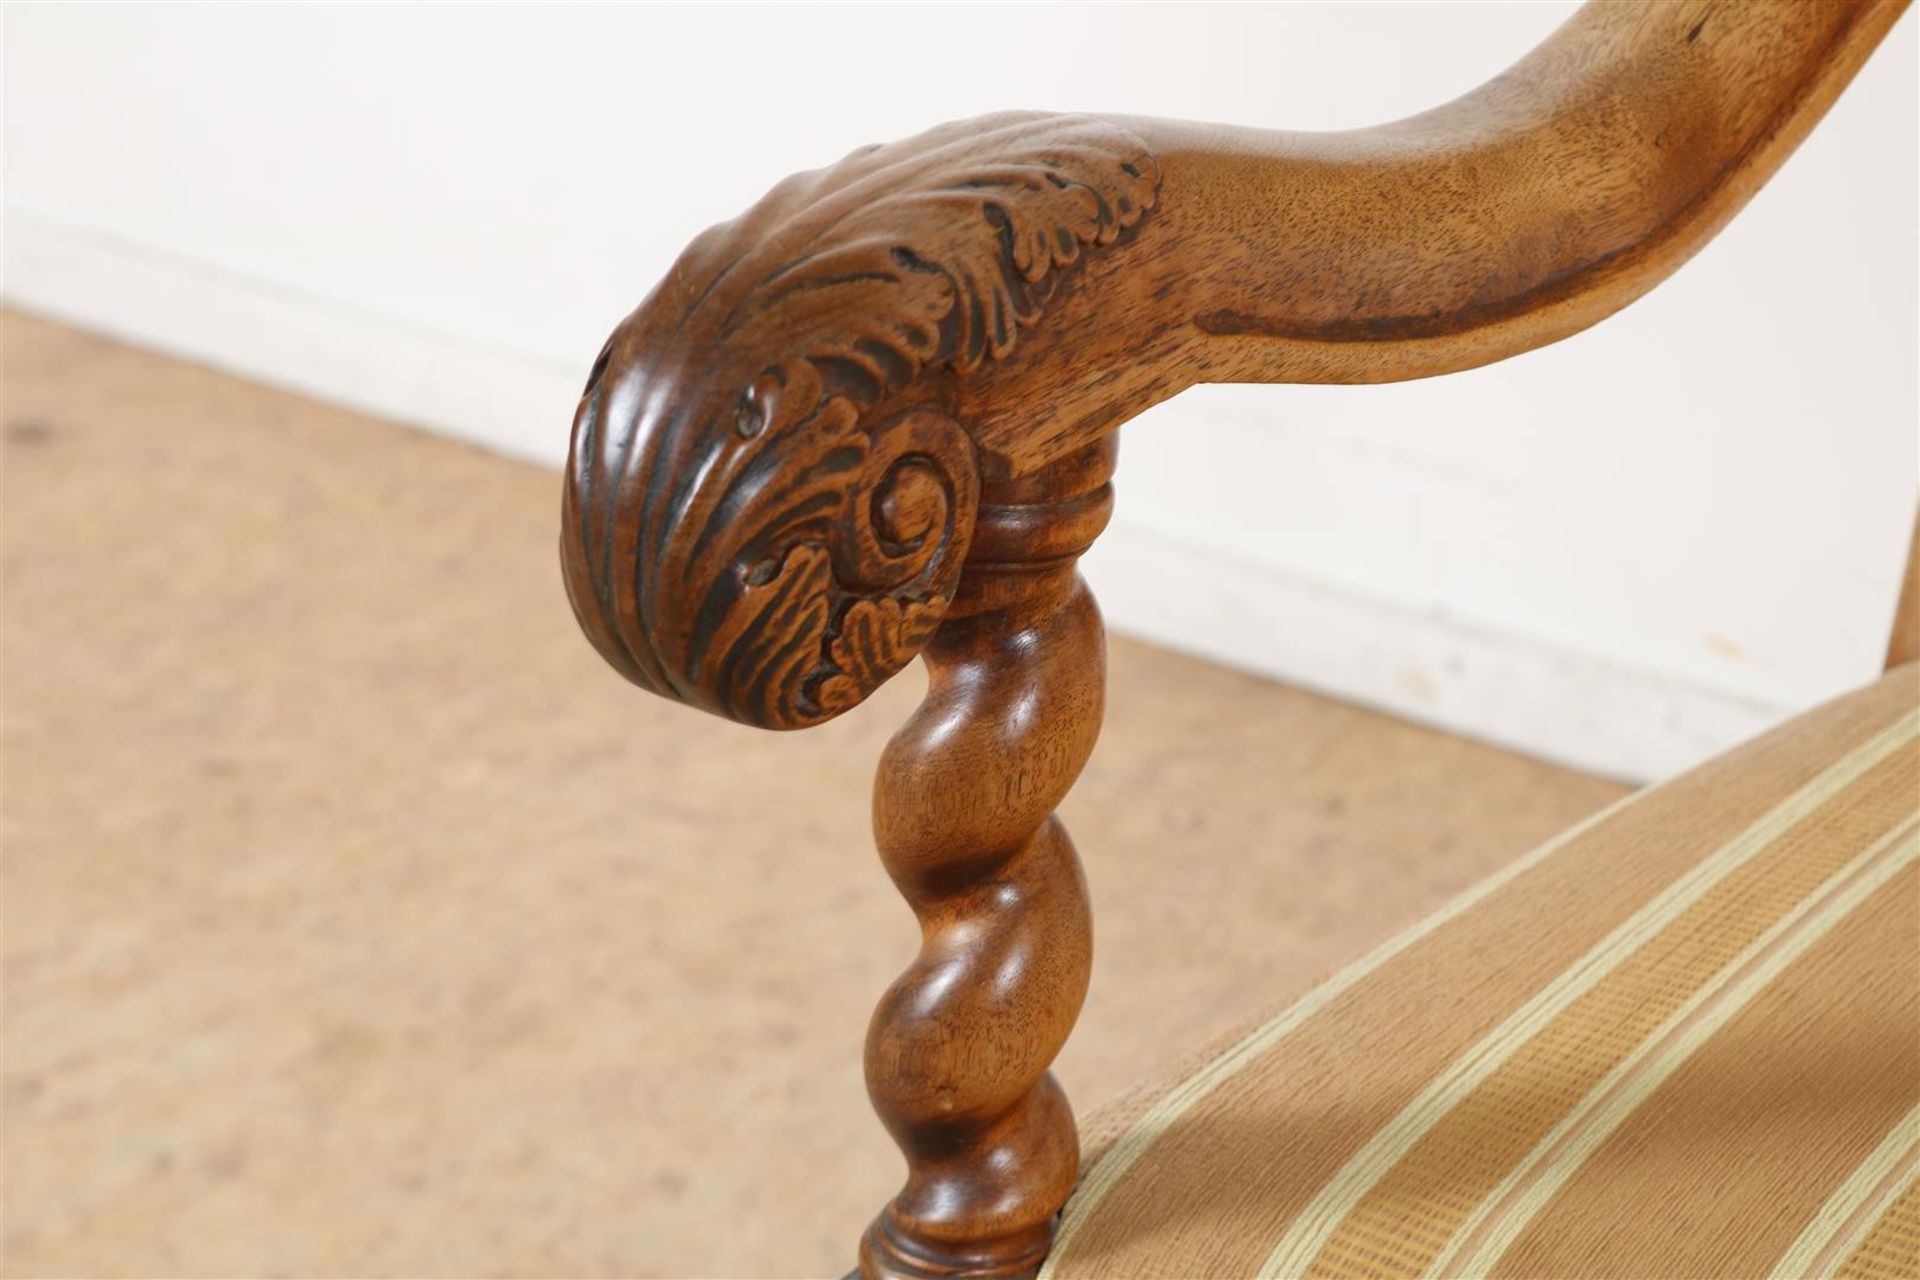 Walnut armchair with striped upholstery and carved acanthus leaves on the armrest. - Image 2 of 5